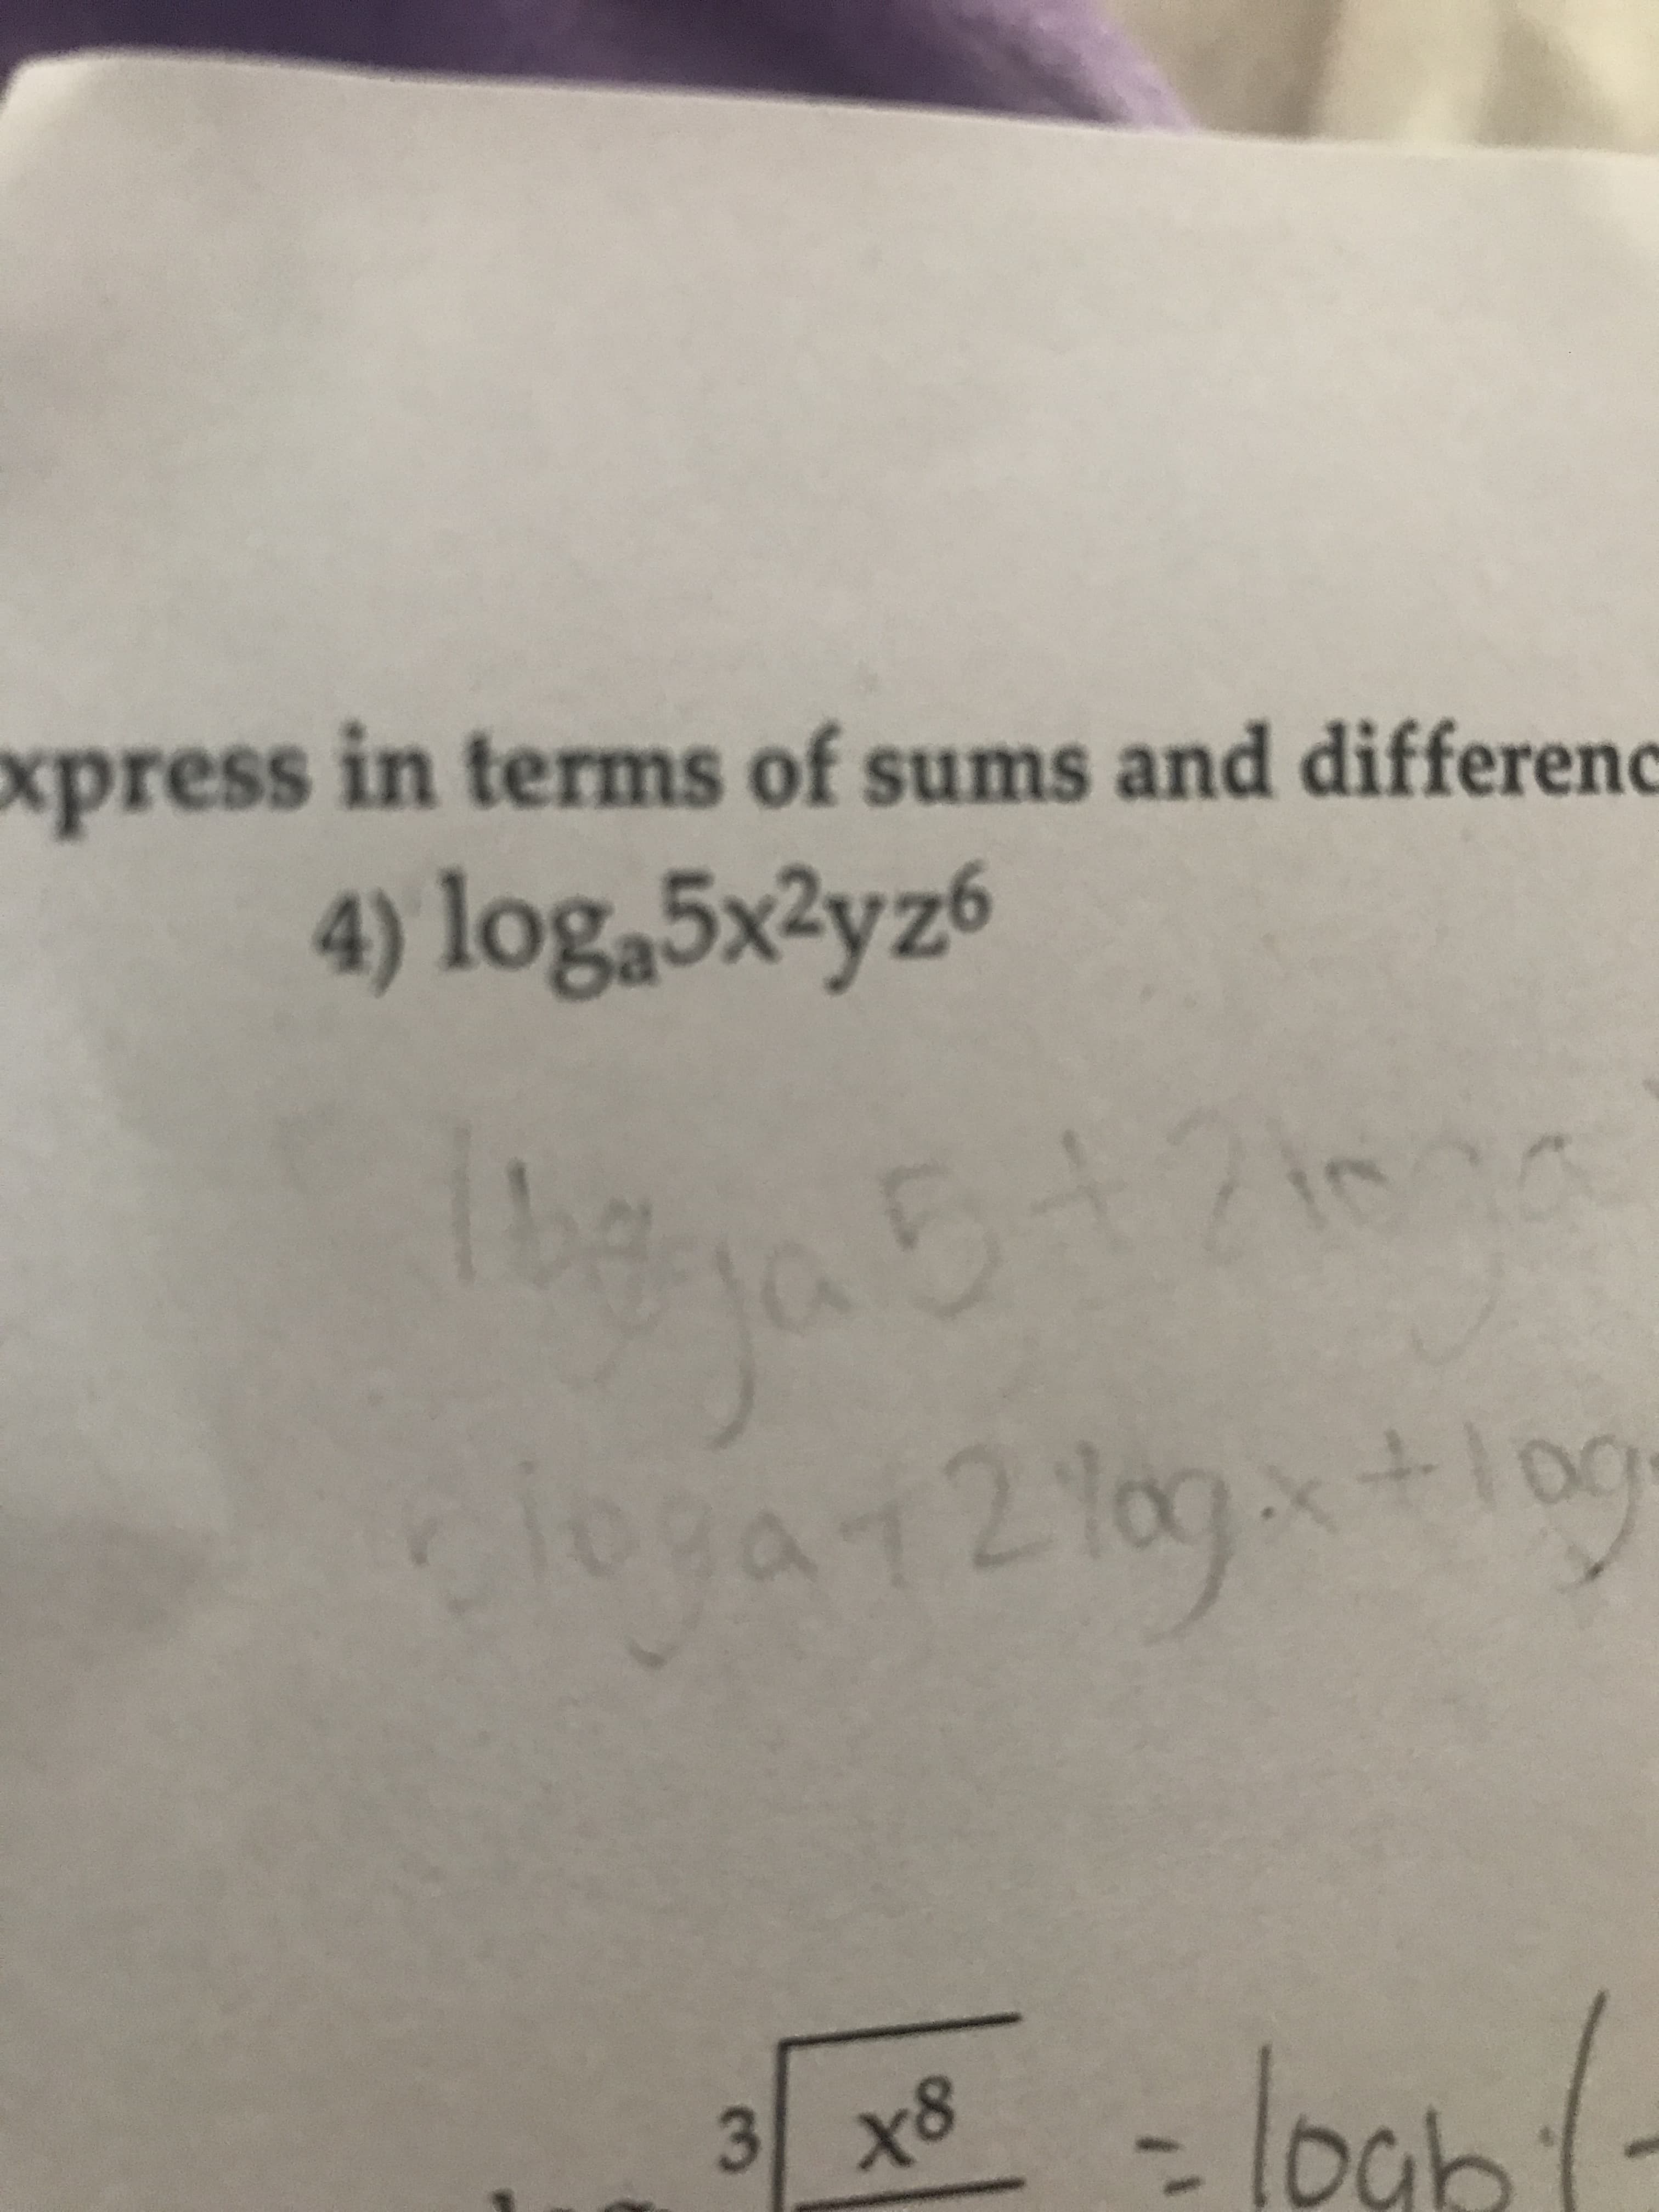 xpress in terms of sums and differenc
4) log,5×²yz6
5+216
clogat210g+10
=lo06/-
